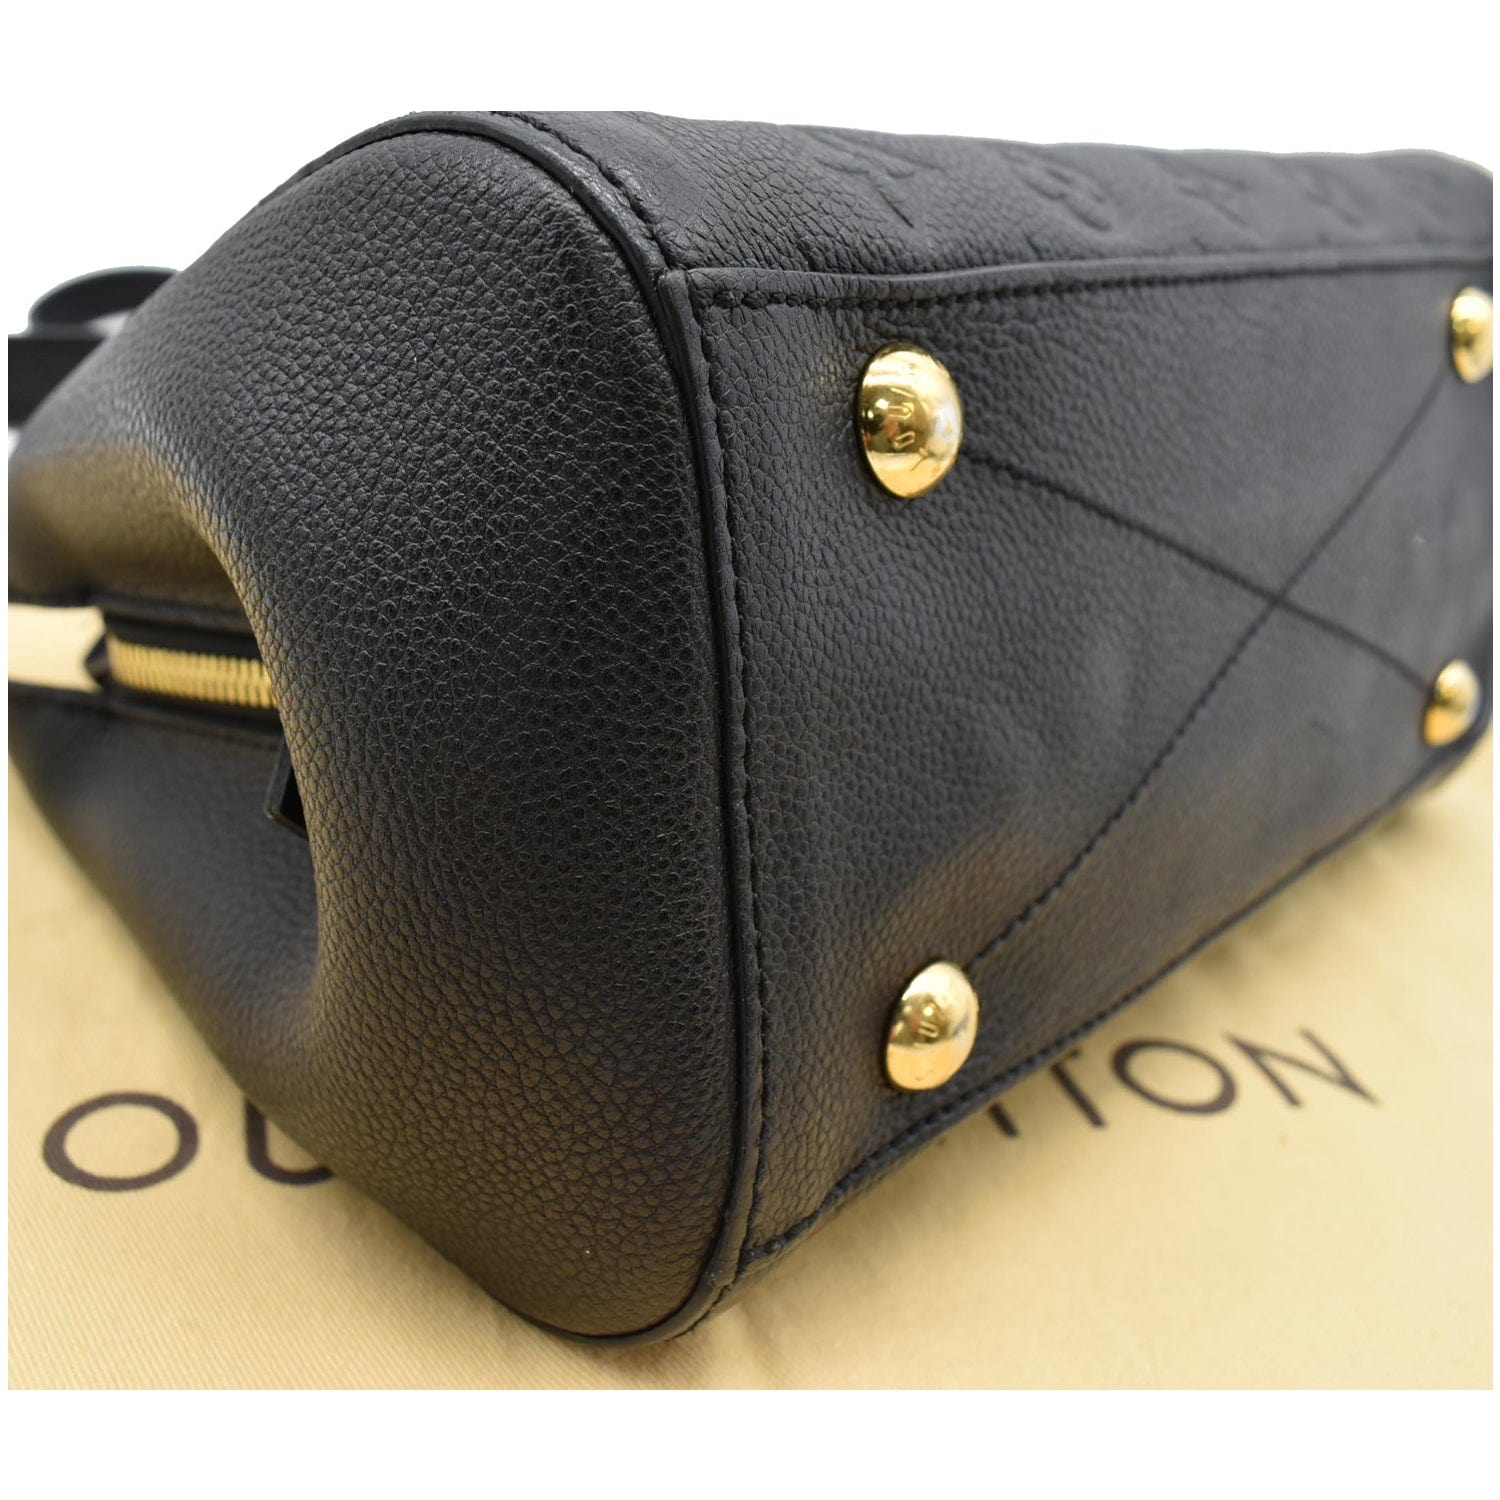 Montaigne BB bag in black leather